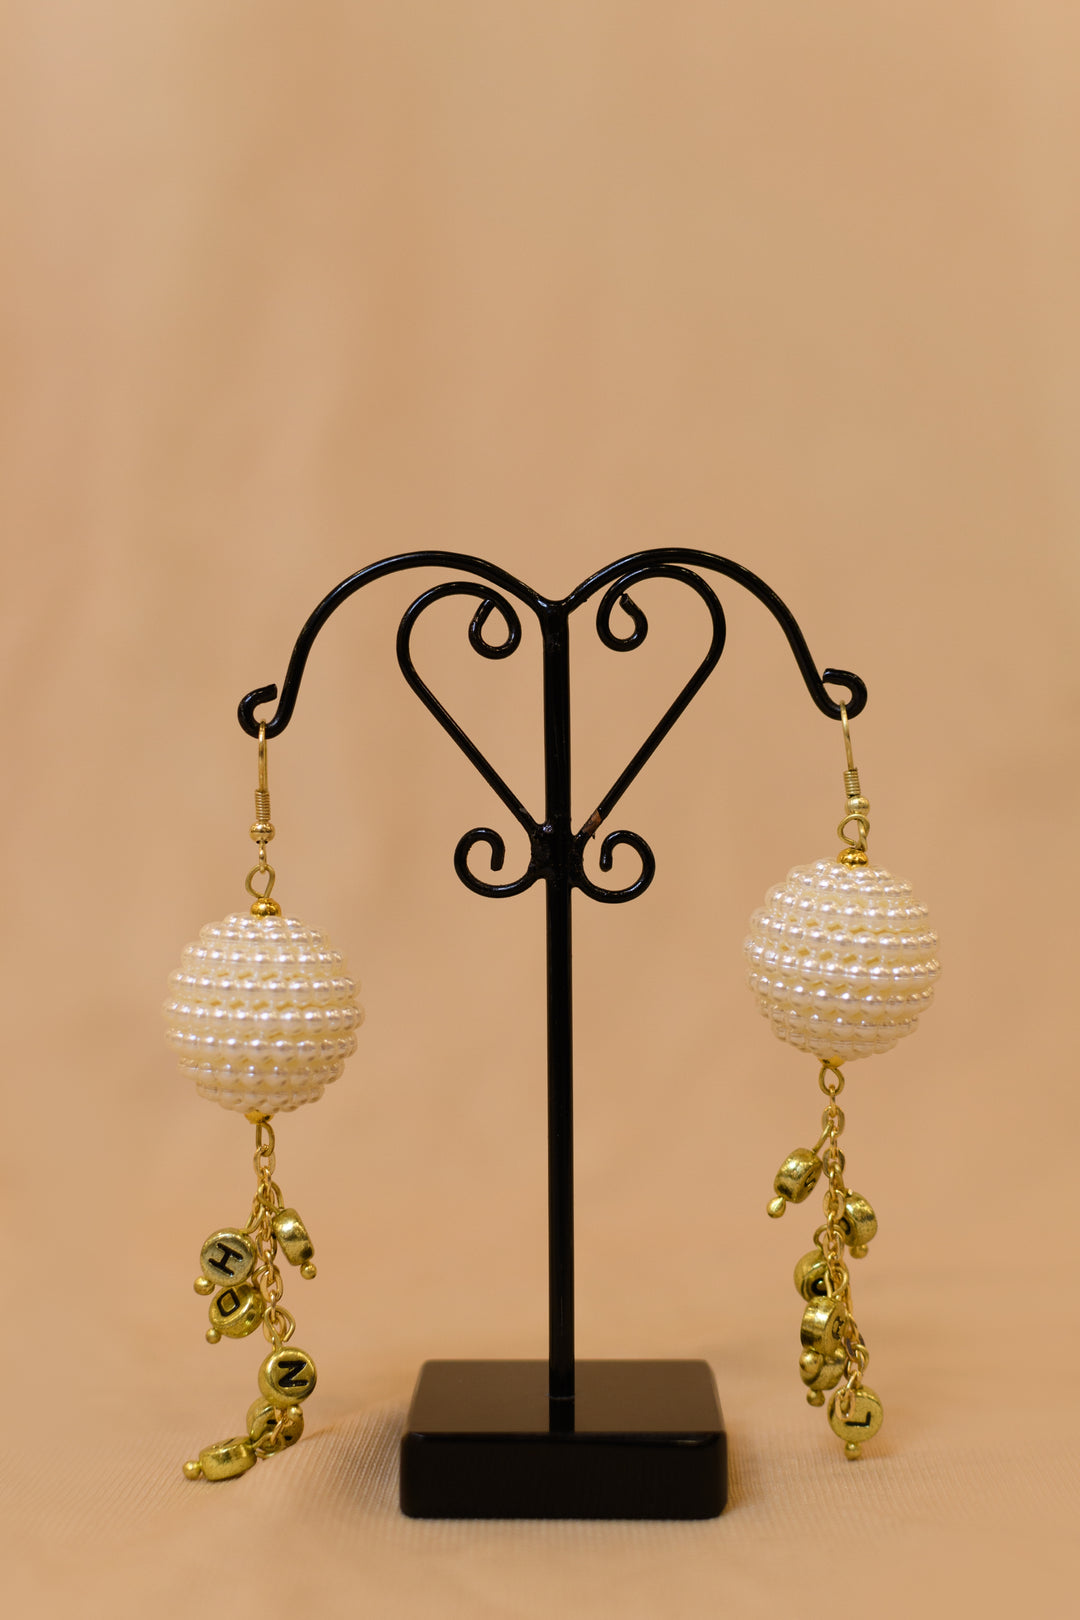 Beaded Pearl Ball Earings With Metal Beads Hanging At The Bottom